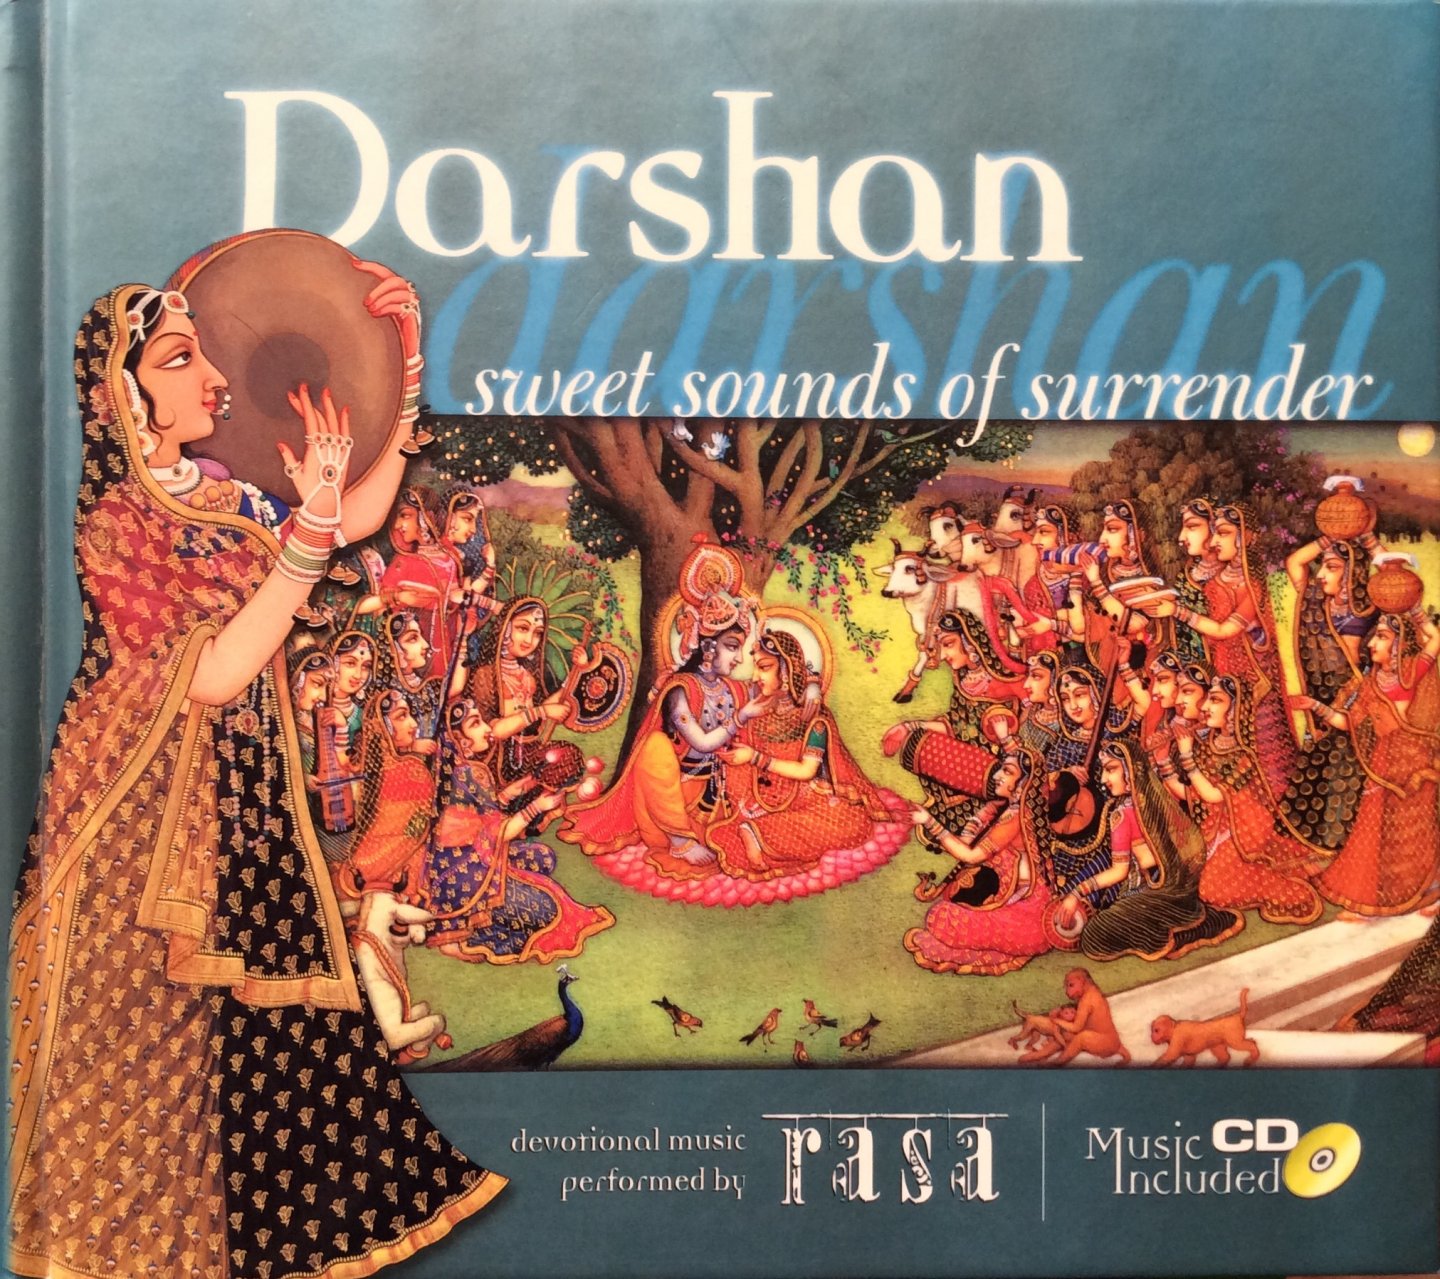 Rasa - Darshan; sweet sounds of surrender (CD included) / devotional music performed by Rasa